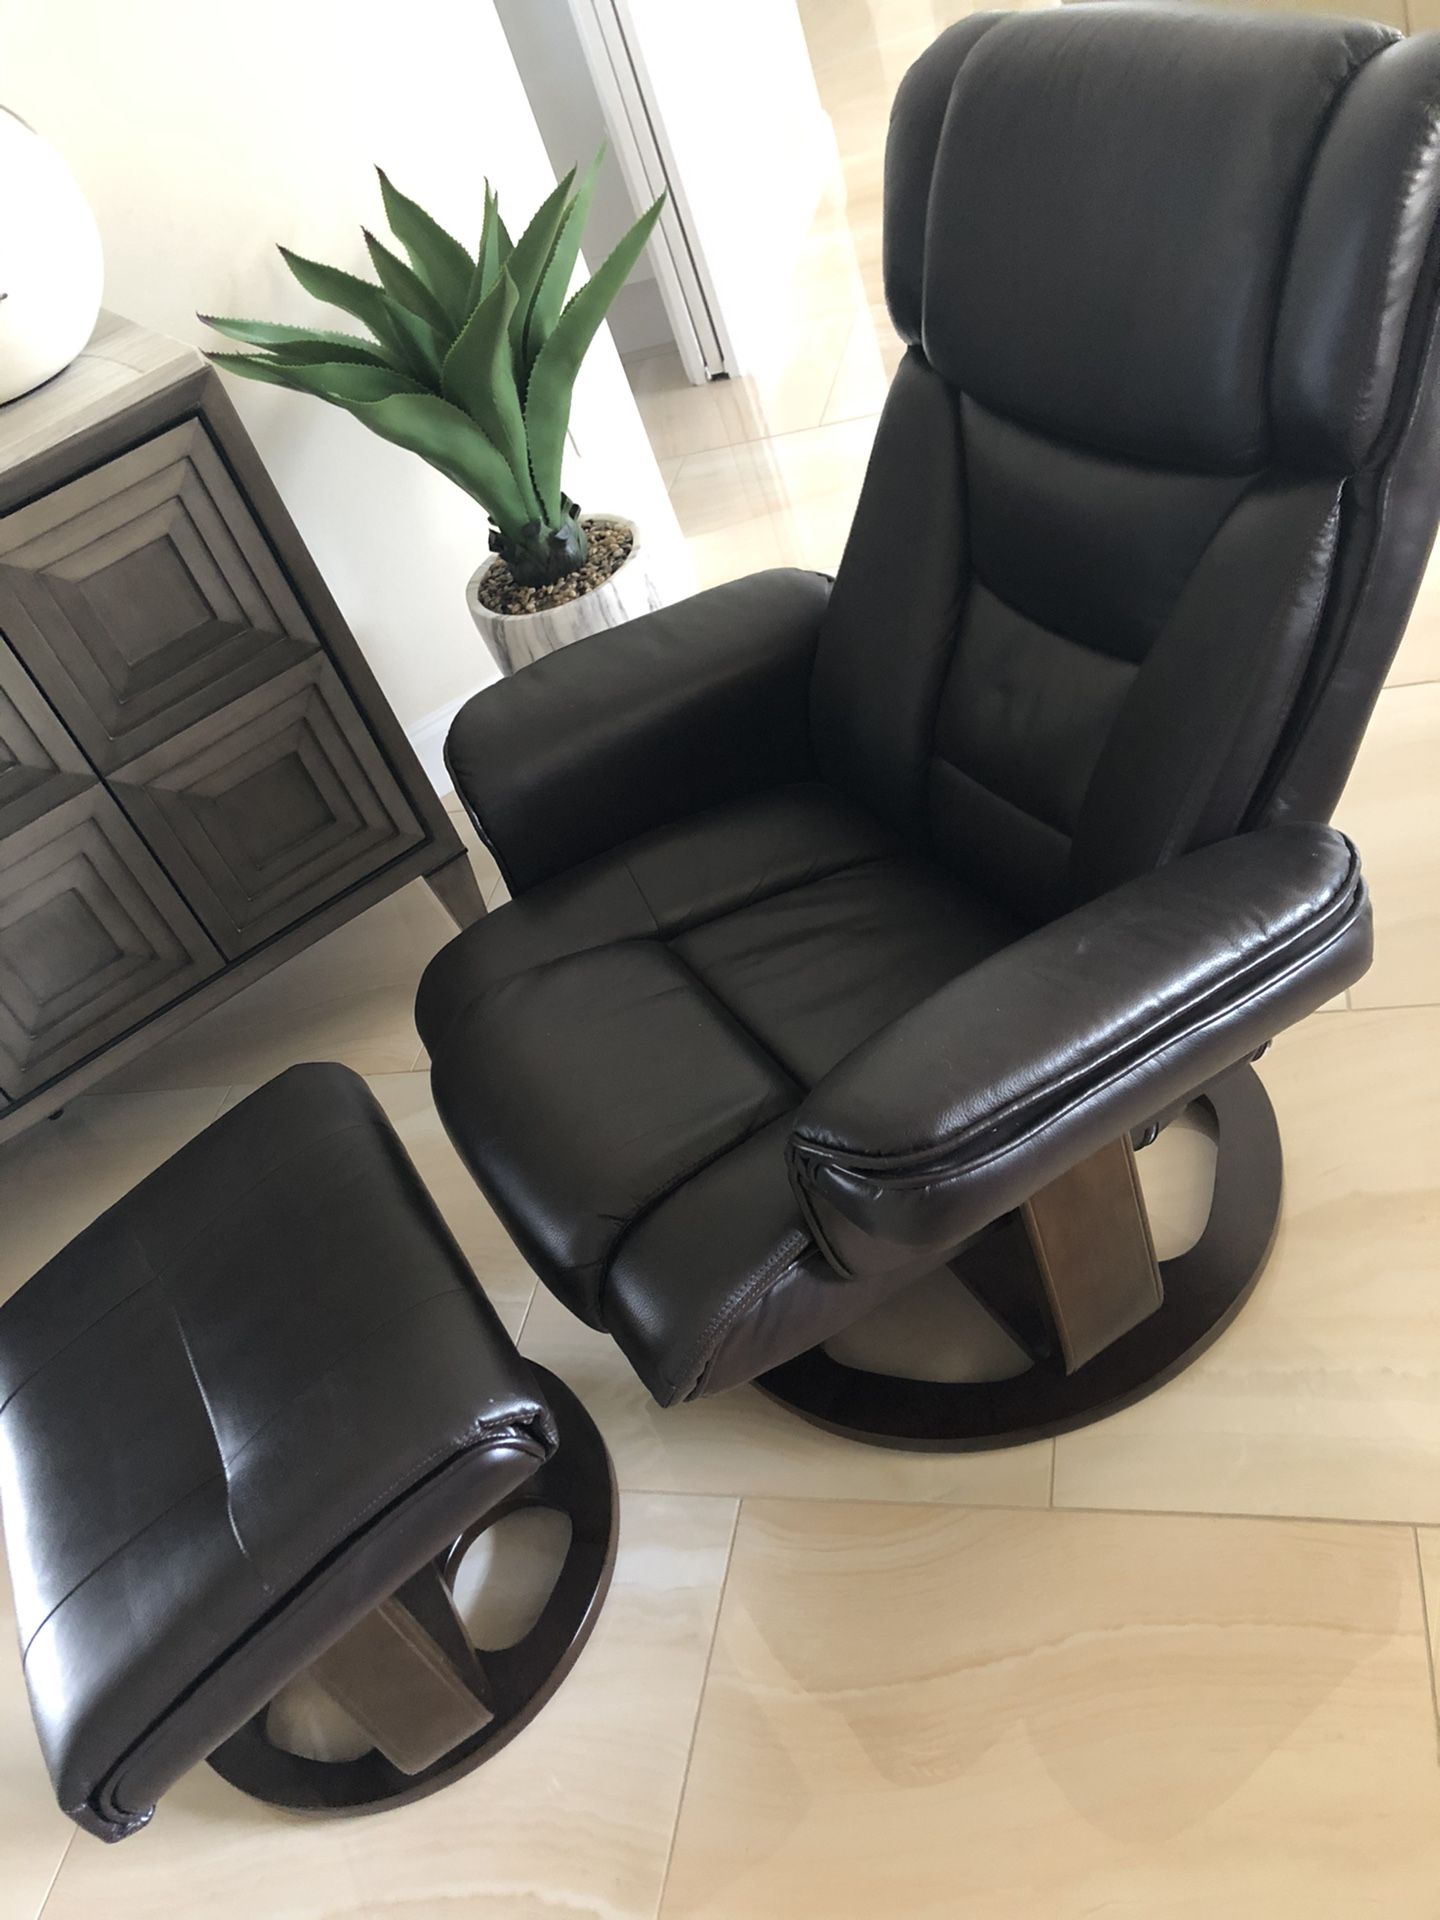 Leather reclining chair with foot rest